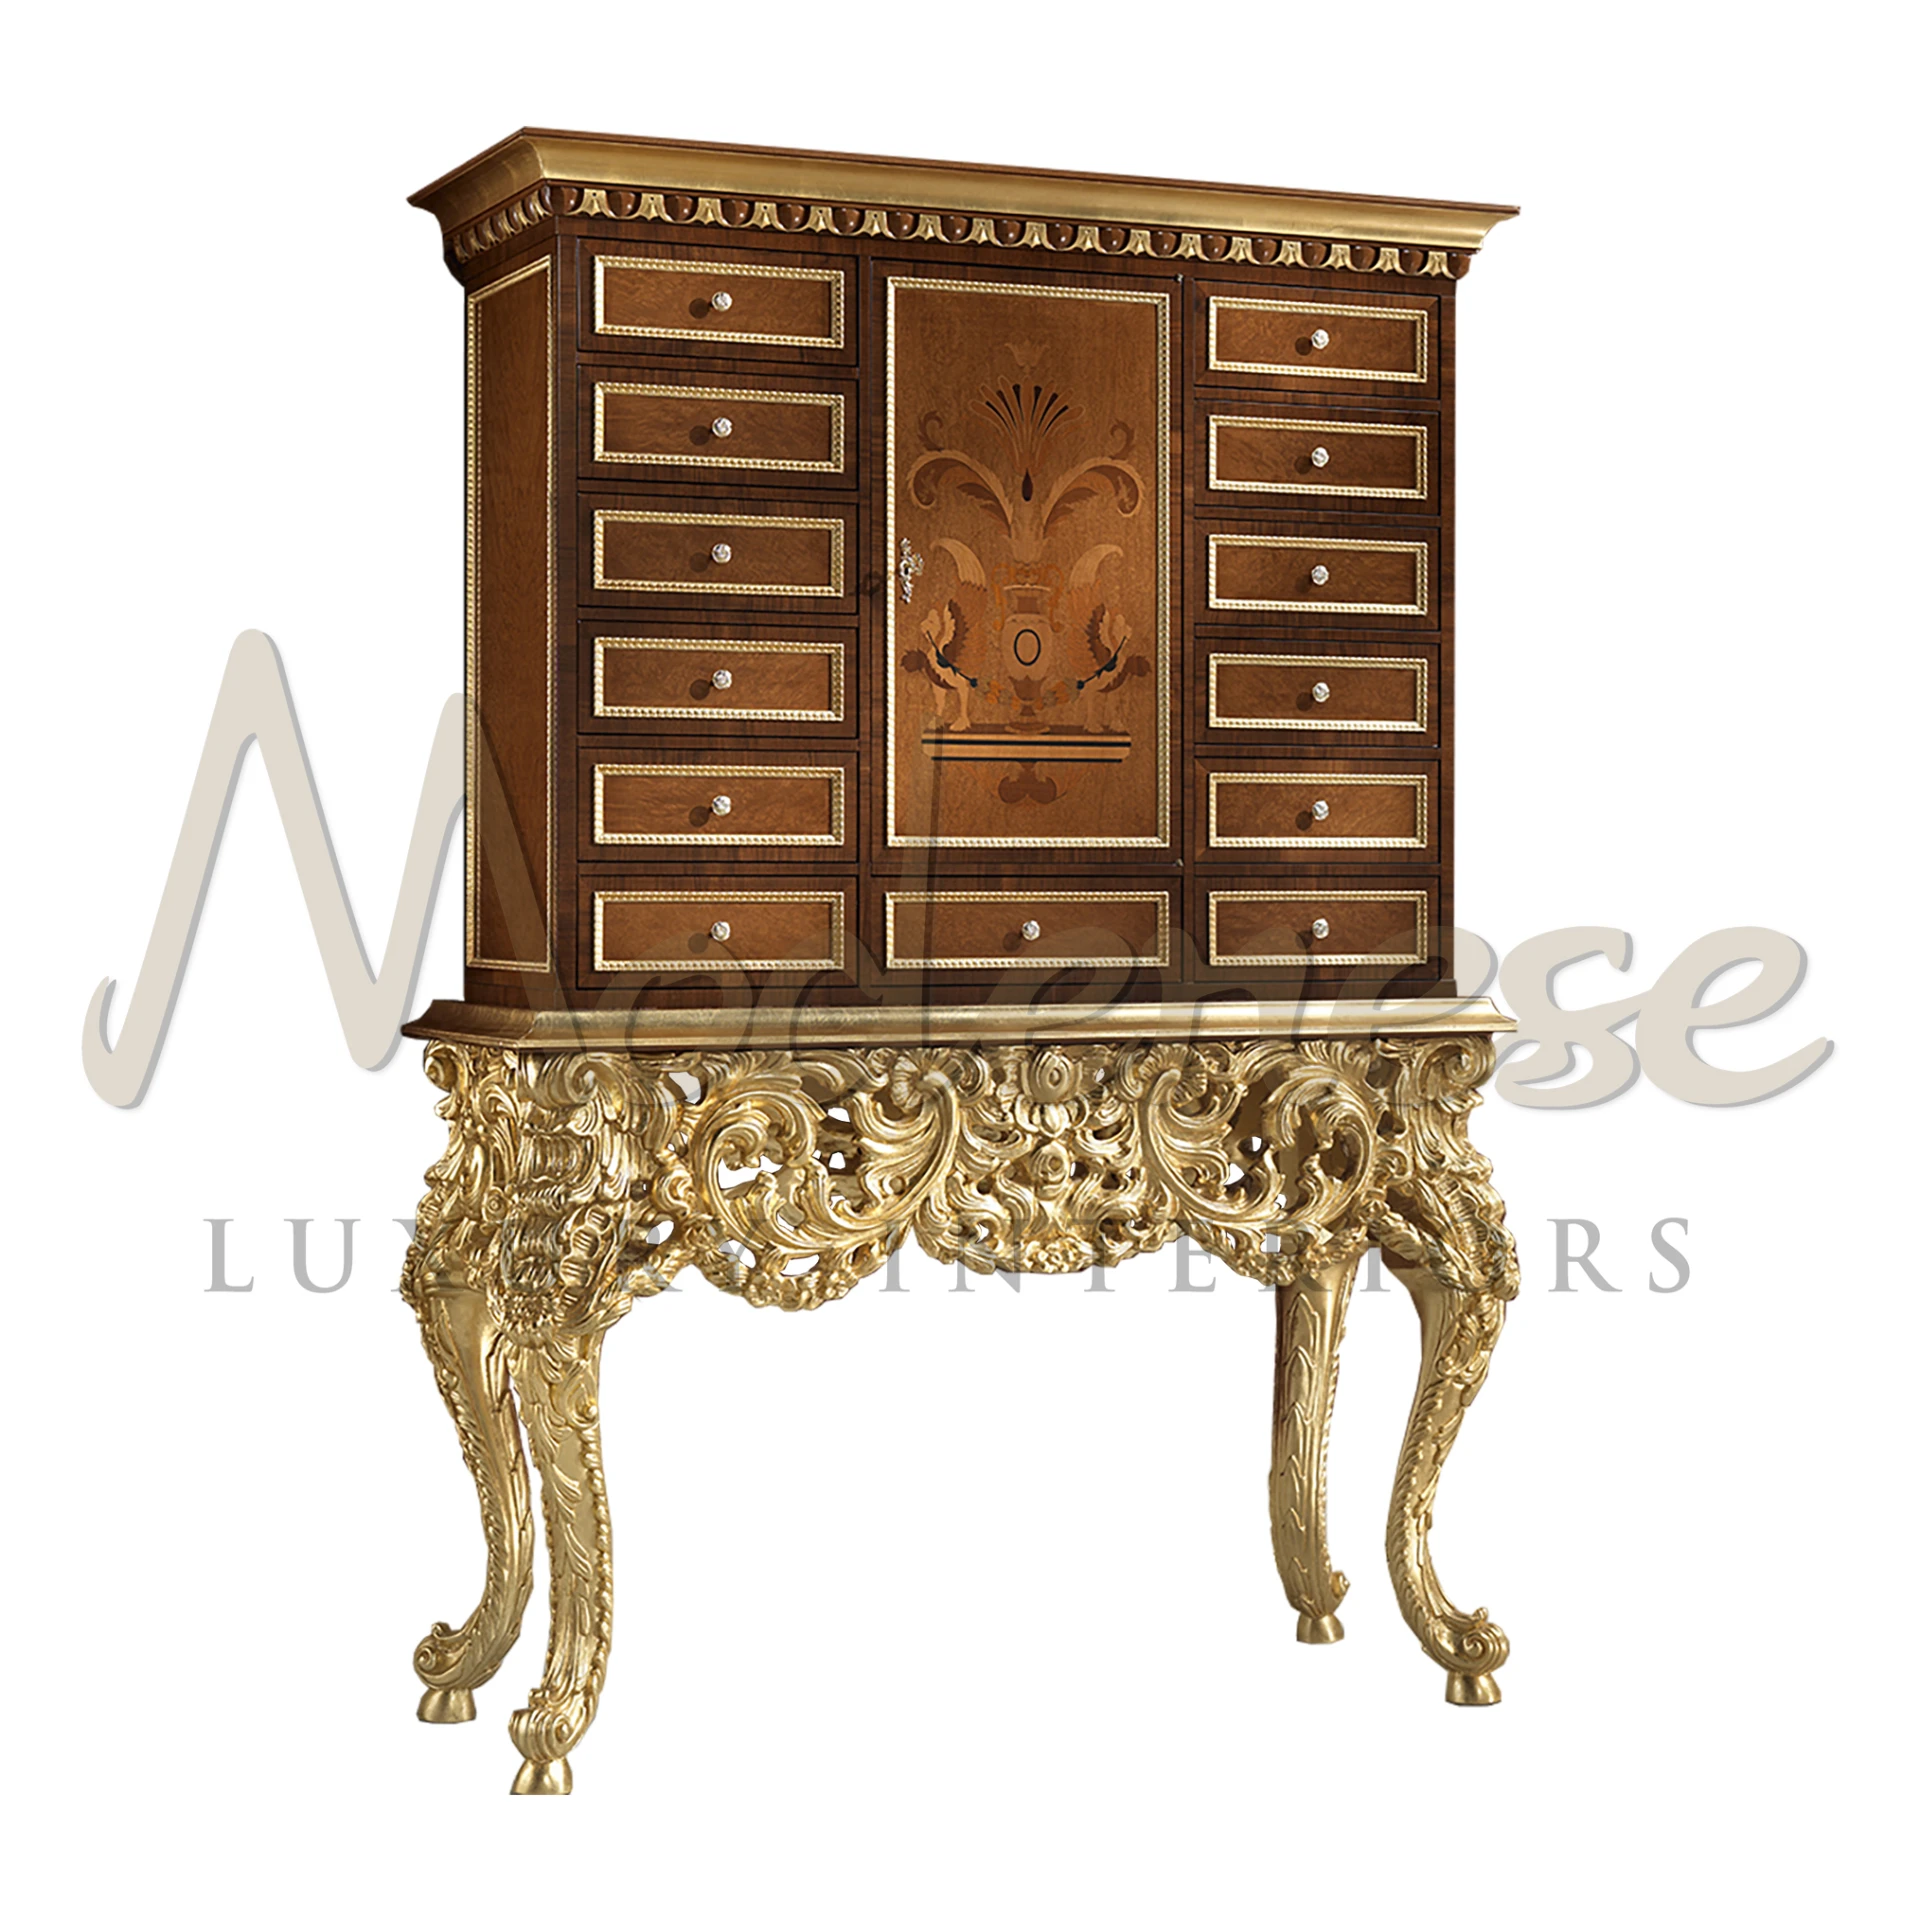 Modenese Furniture presents a solid wood coin cabinet with 13 drawers, adorned with hand-carved squiggles and gold leaf highlights. A walnut finish and inlaid drawers define pure luxury.